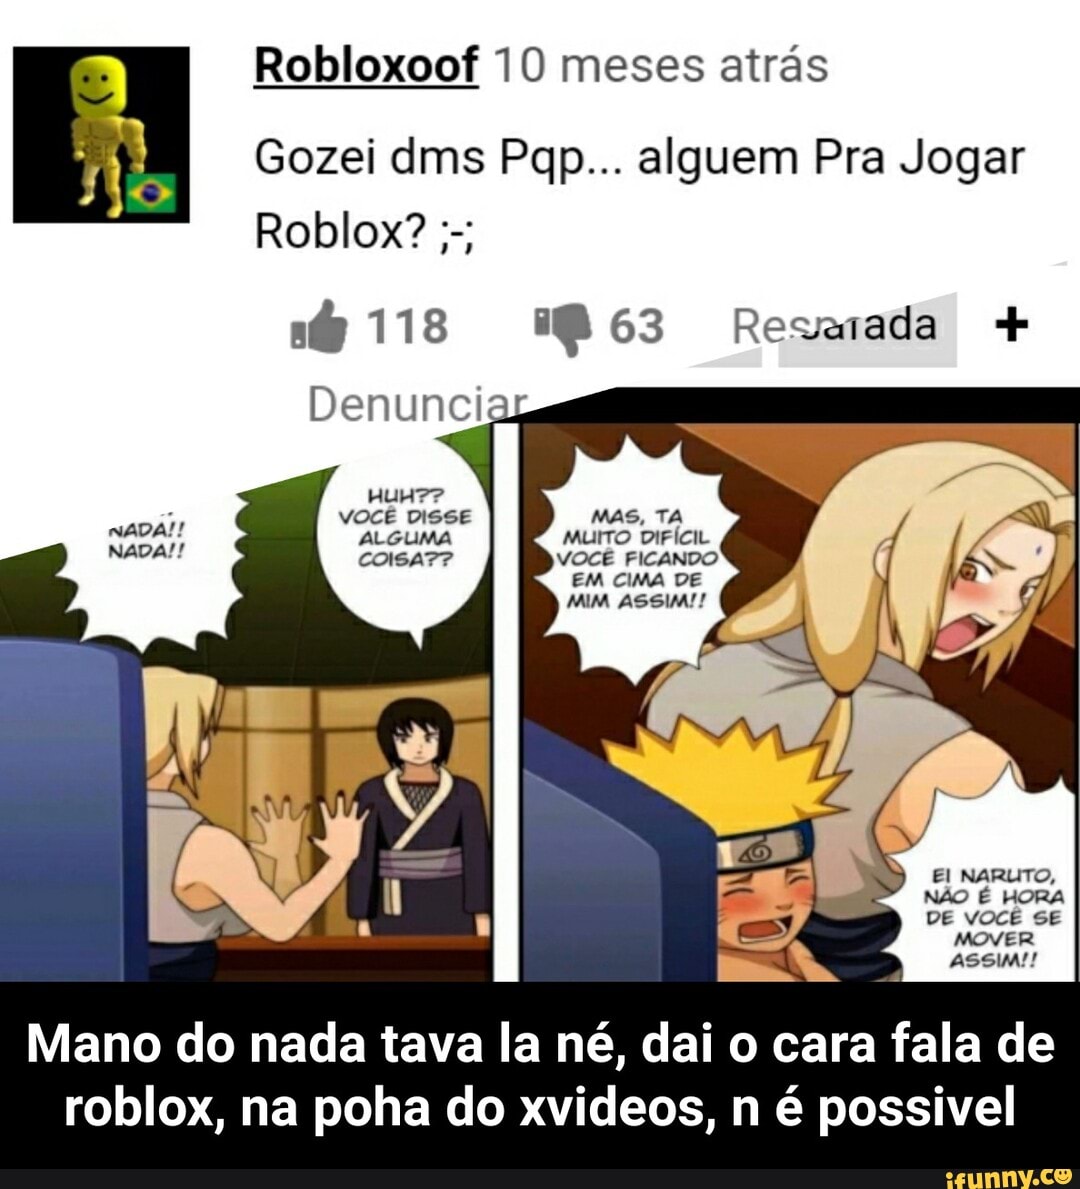 Xdideos memes. Best Collection of funny Xdideos pictures on iFunny Brazil